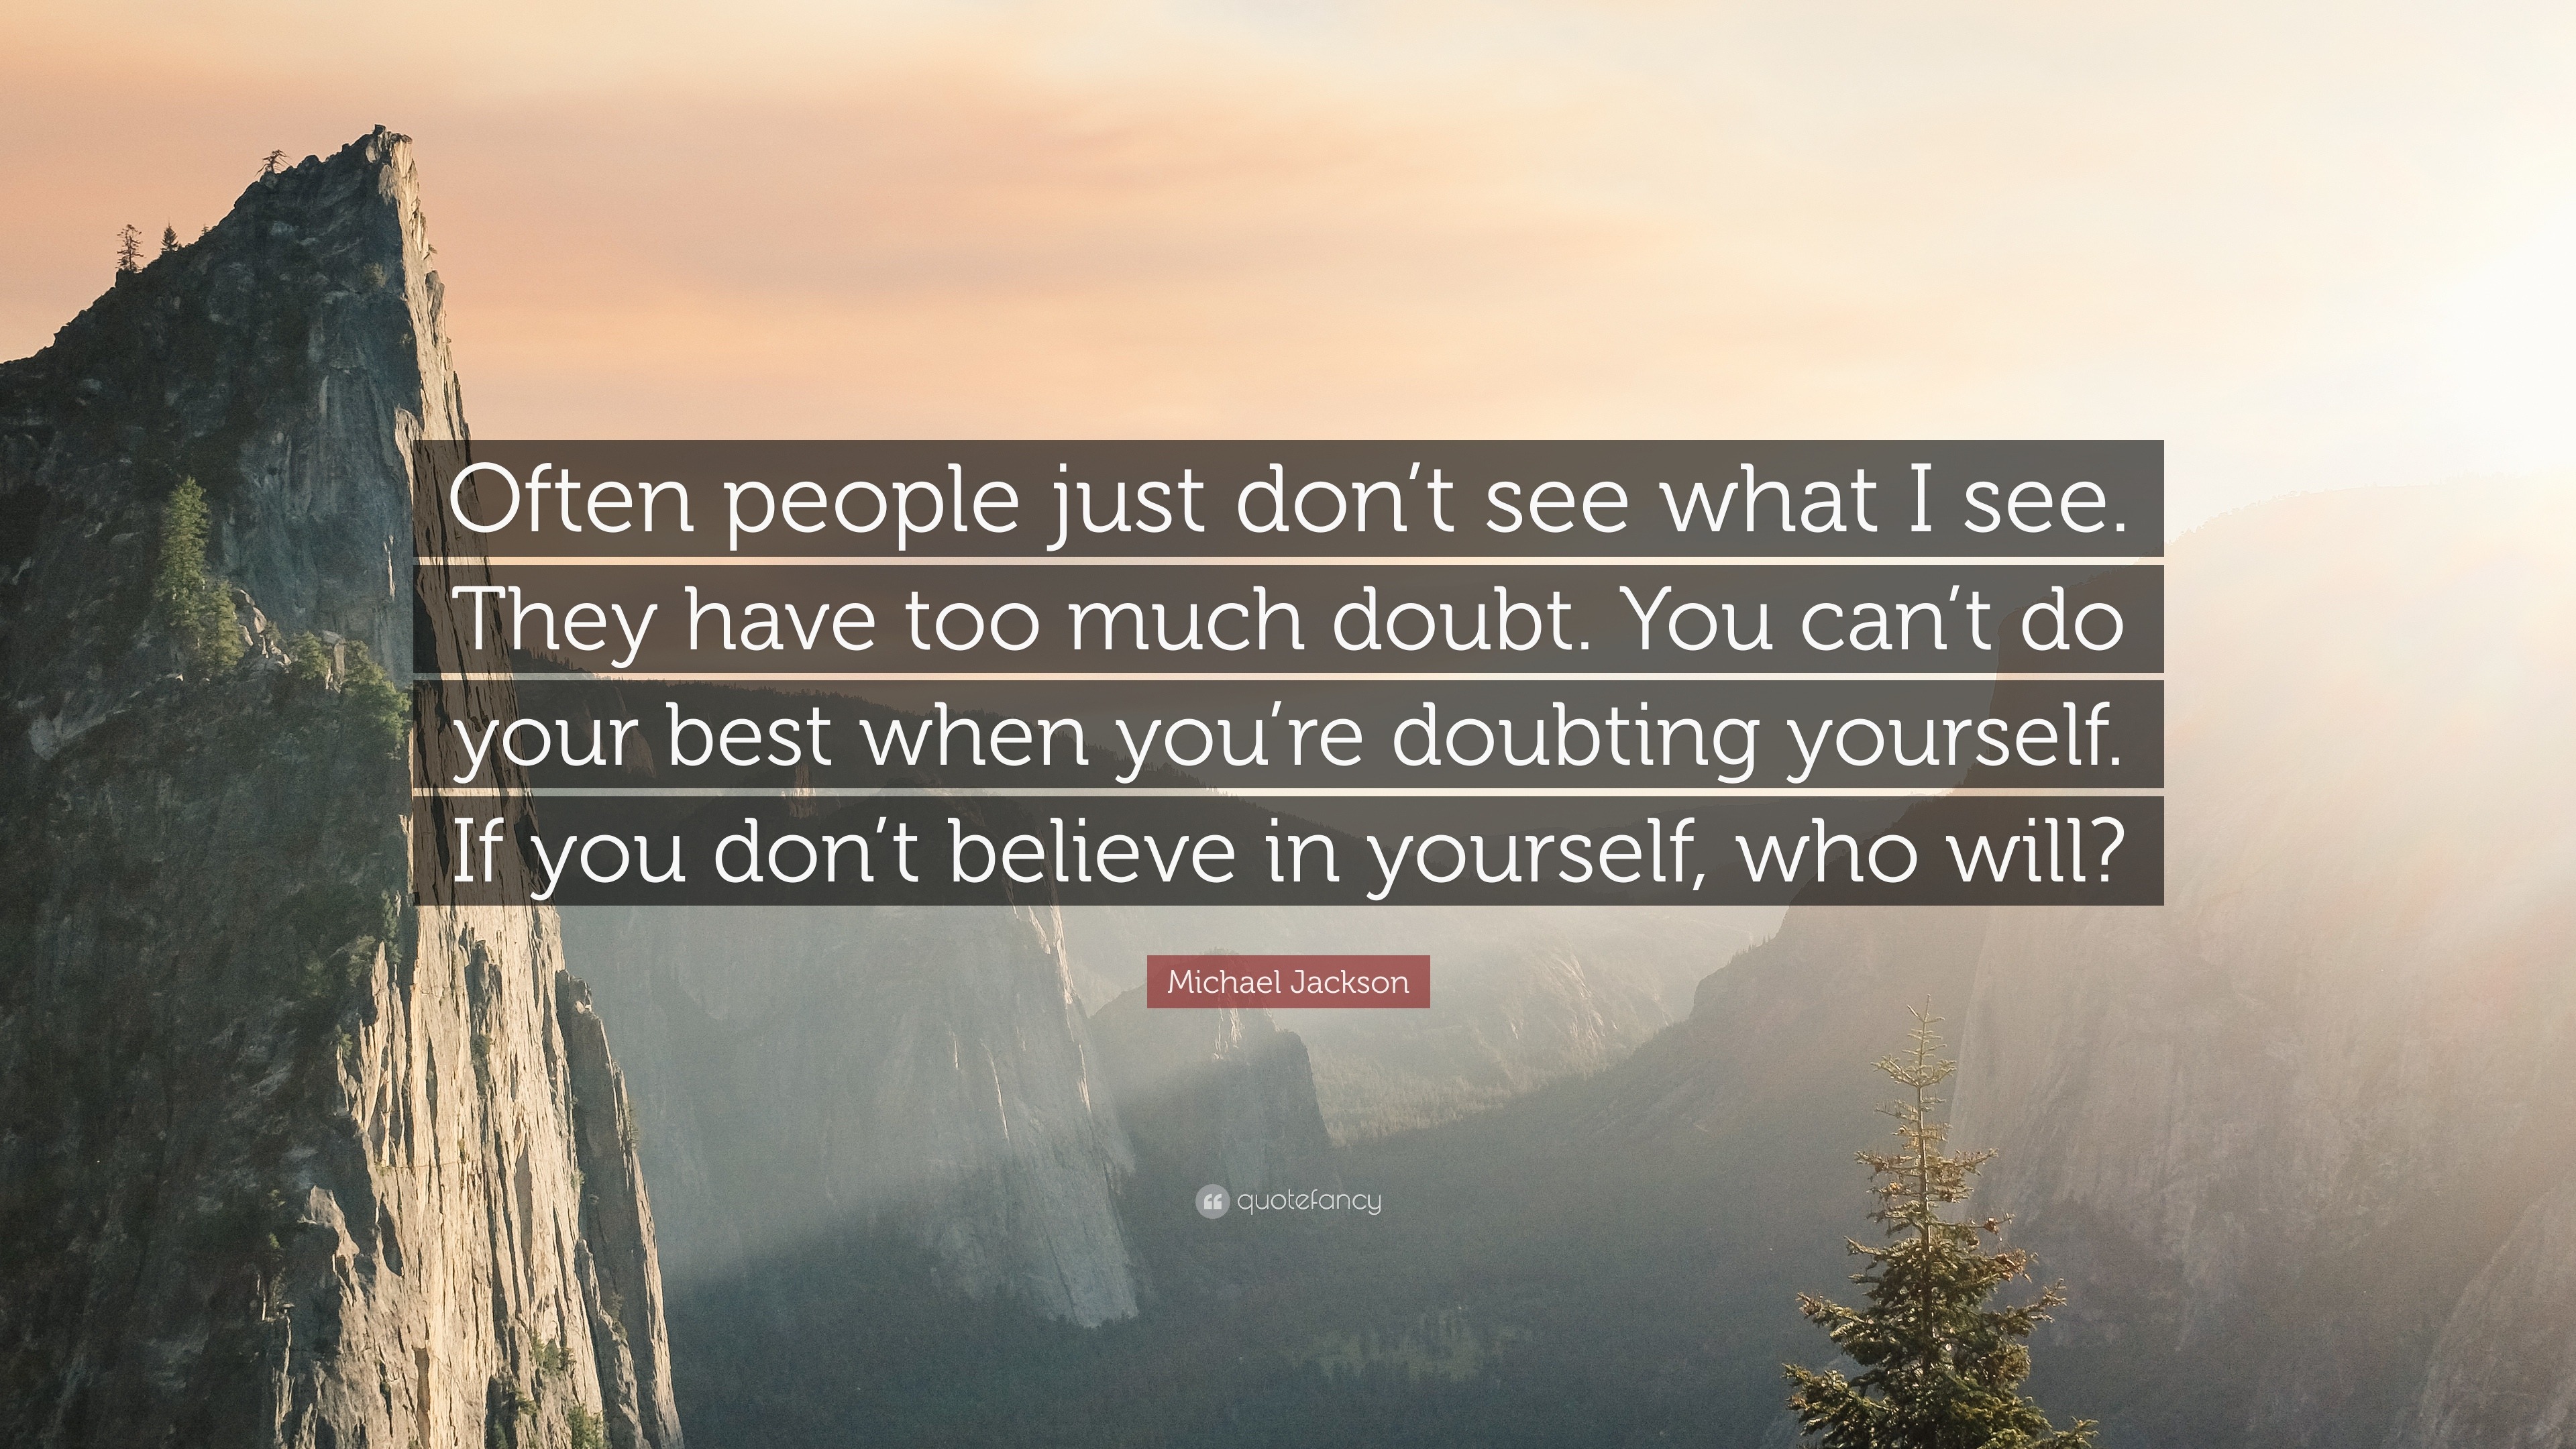 Michael Jackson Quote: “Often People Just Don't See What I See. They Have Too Much Doubt. You Can't Do Your Best When You're Doubting Yourself. ...”